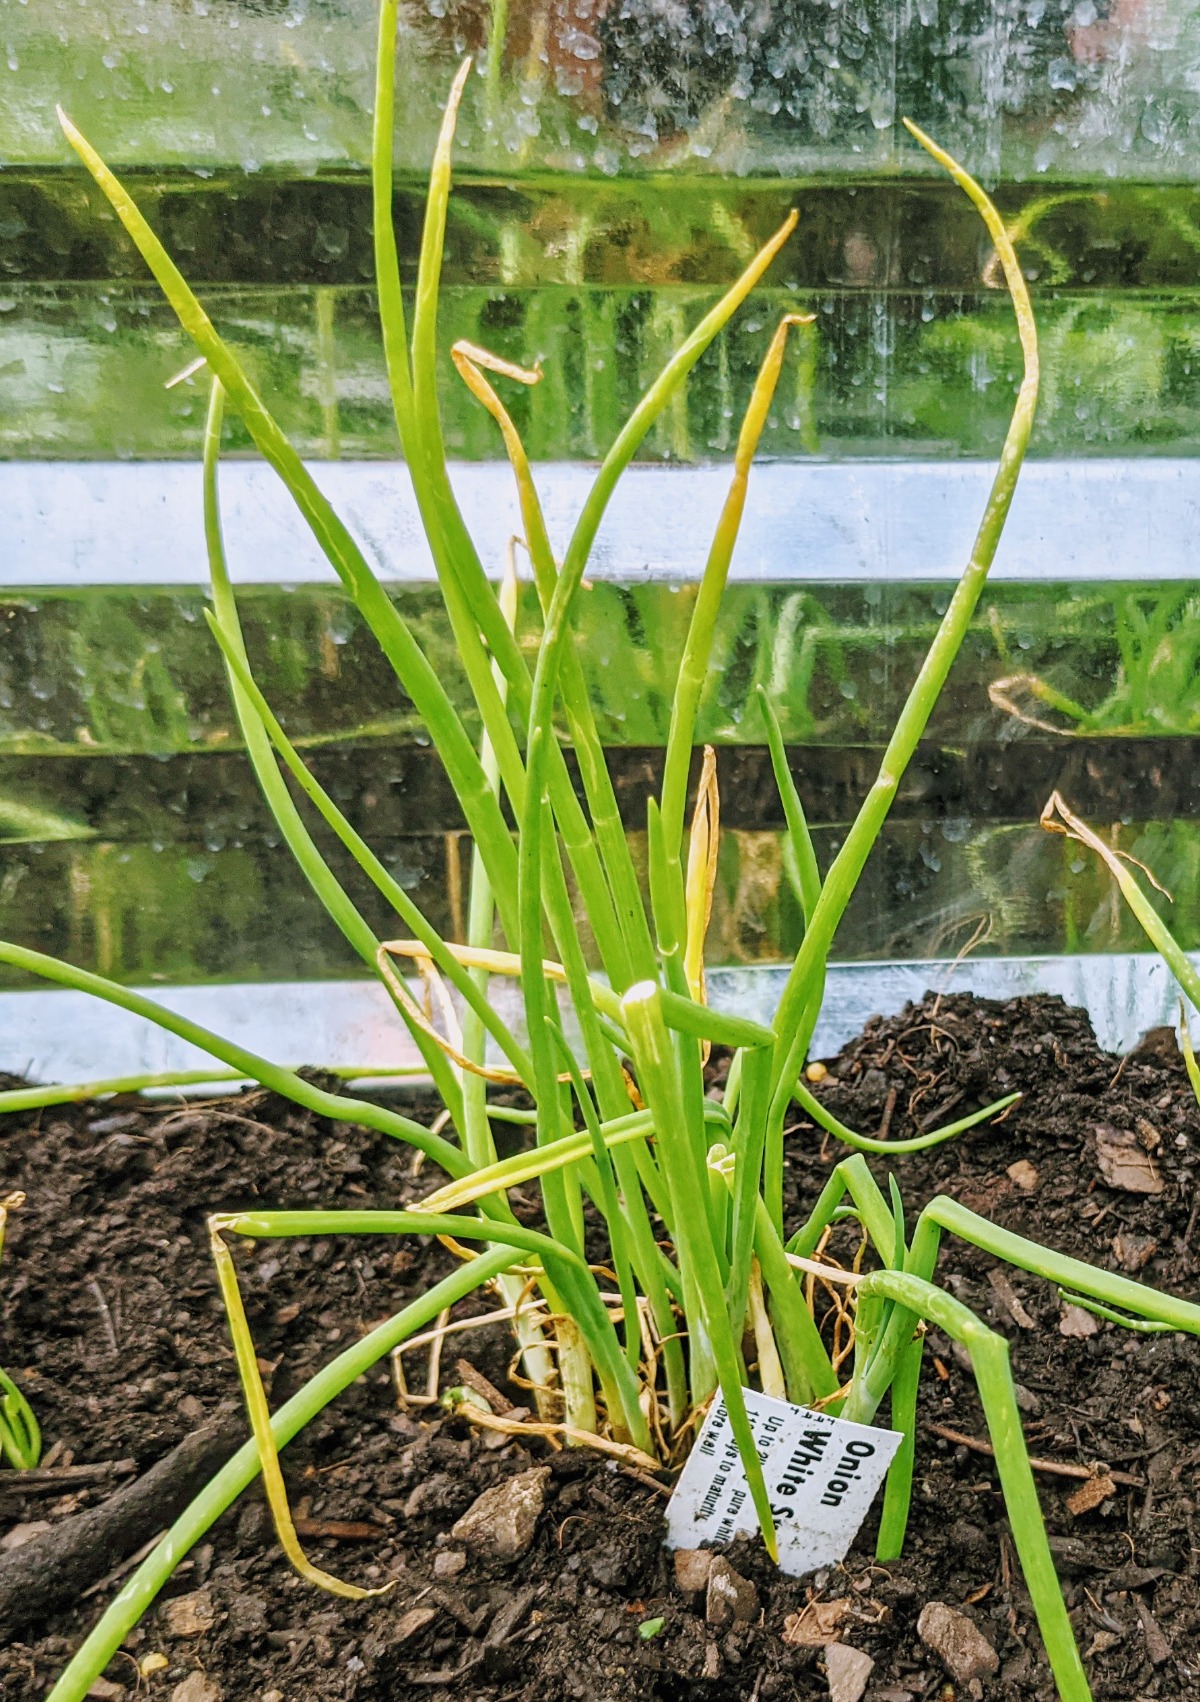 Onion Sets Growing in the garden - Finding Onions Companion Plants 